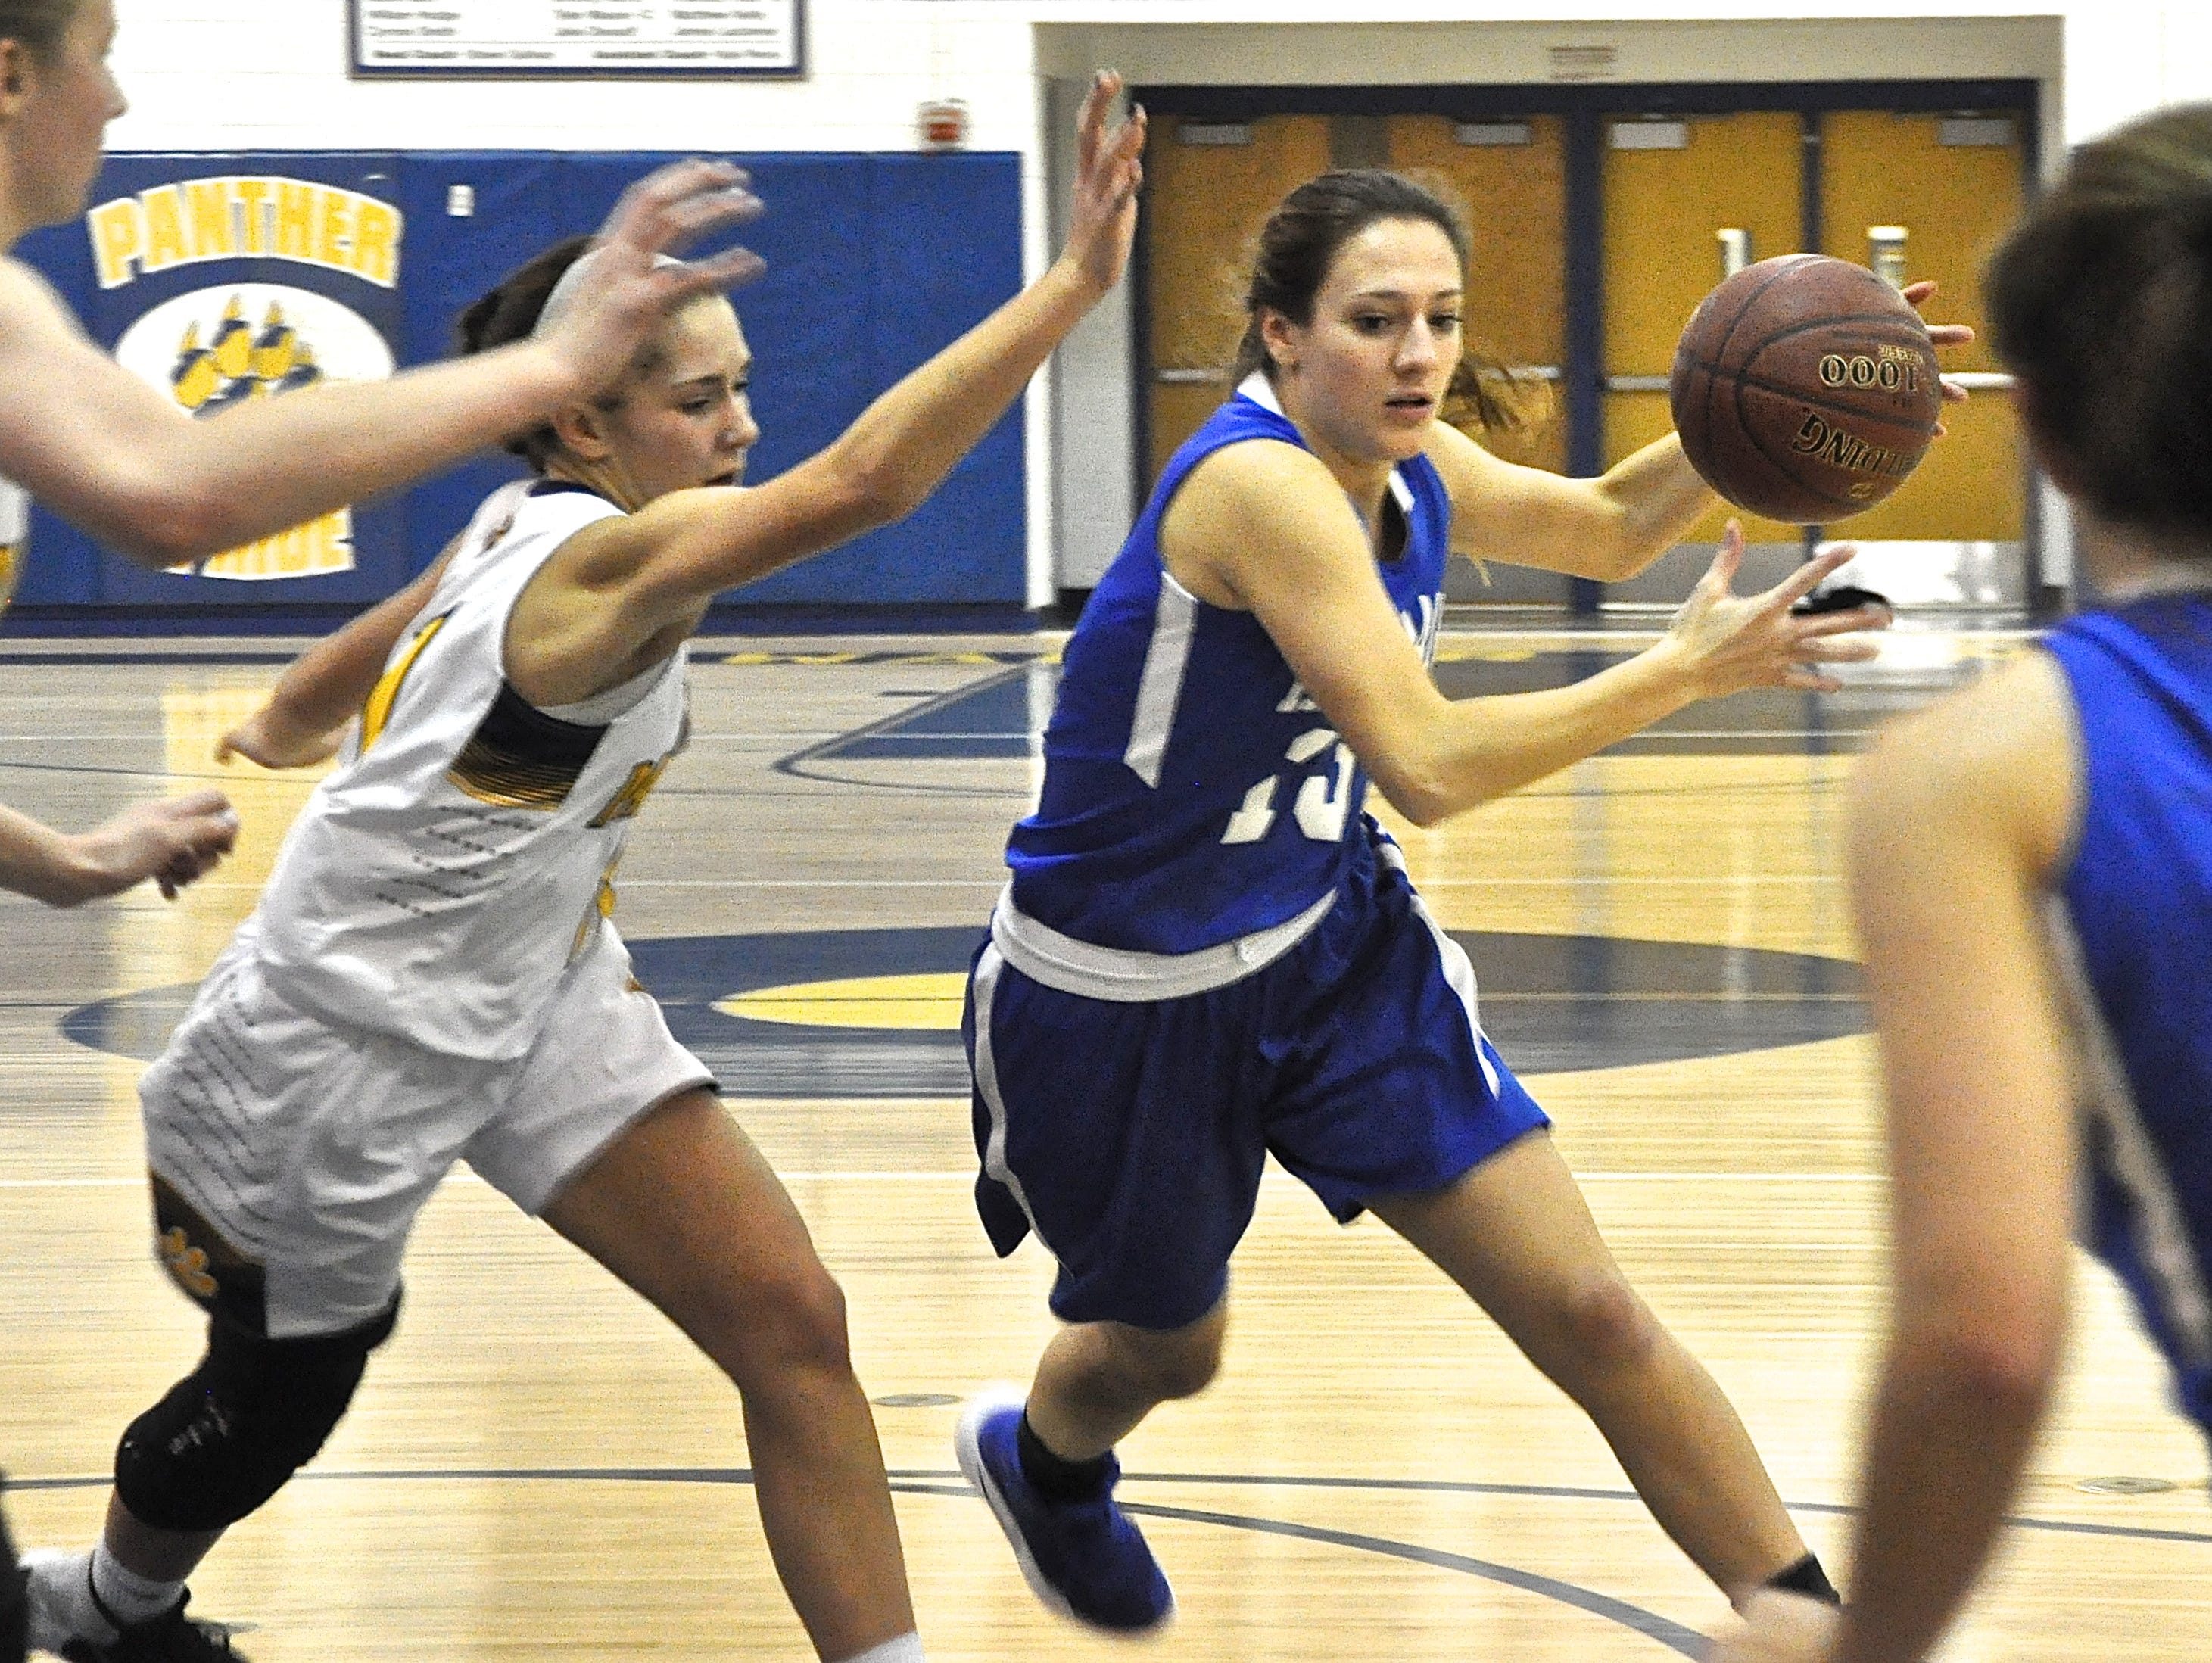 Haldane's Allison Chiera drives to the basket. She was fouled and sank 1 of 2 shots.